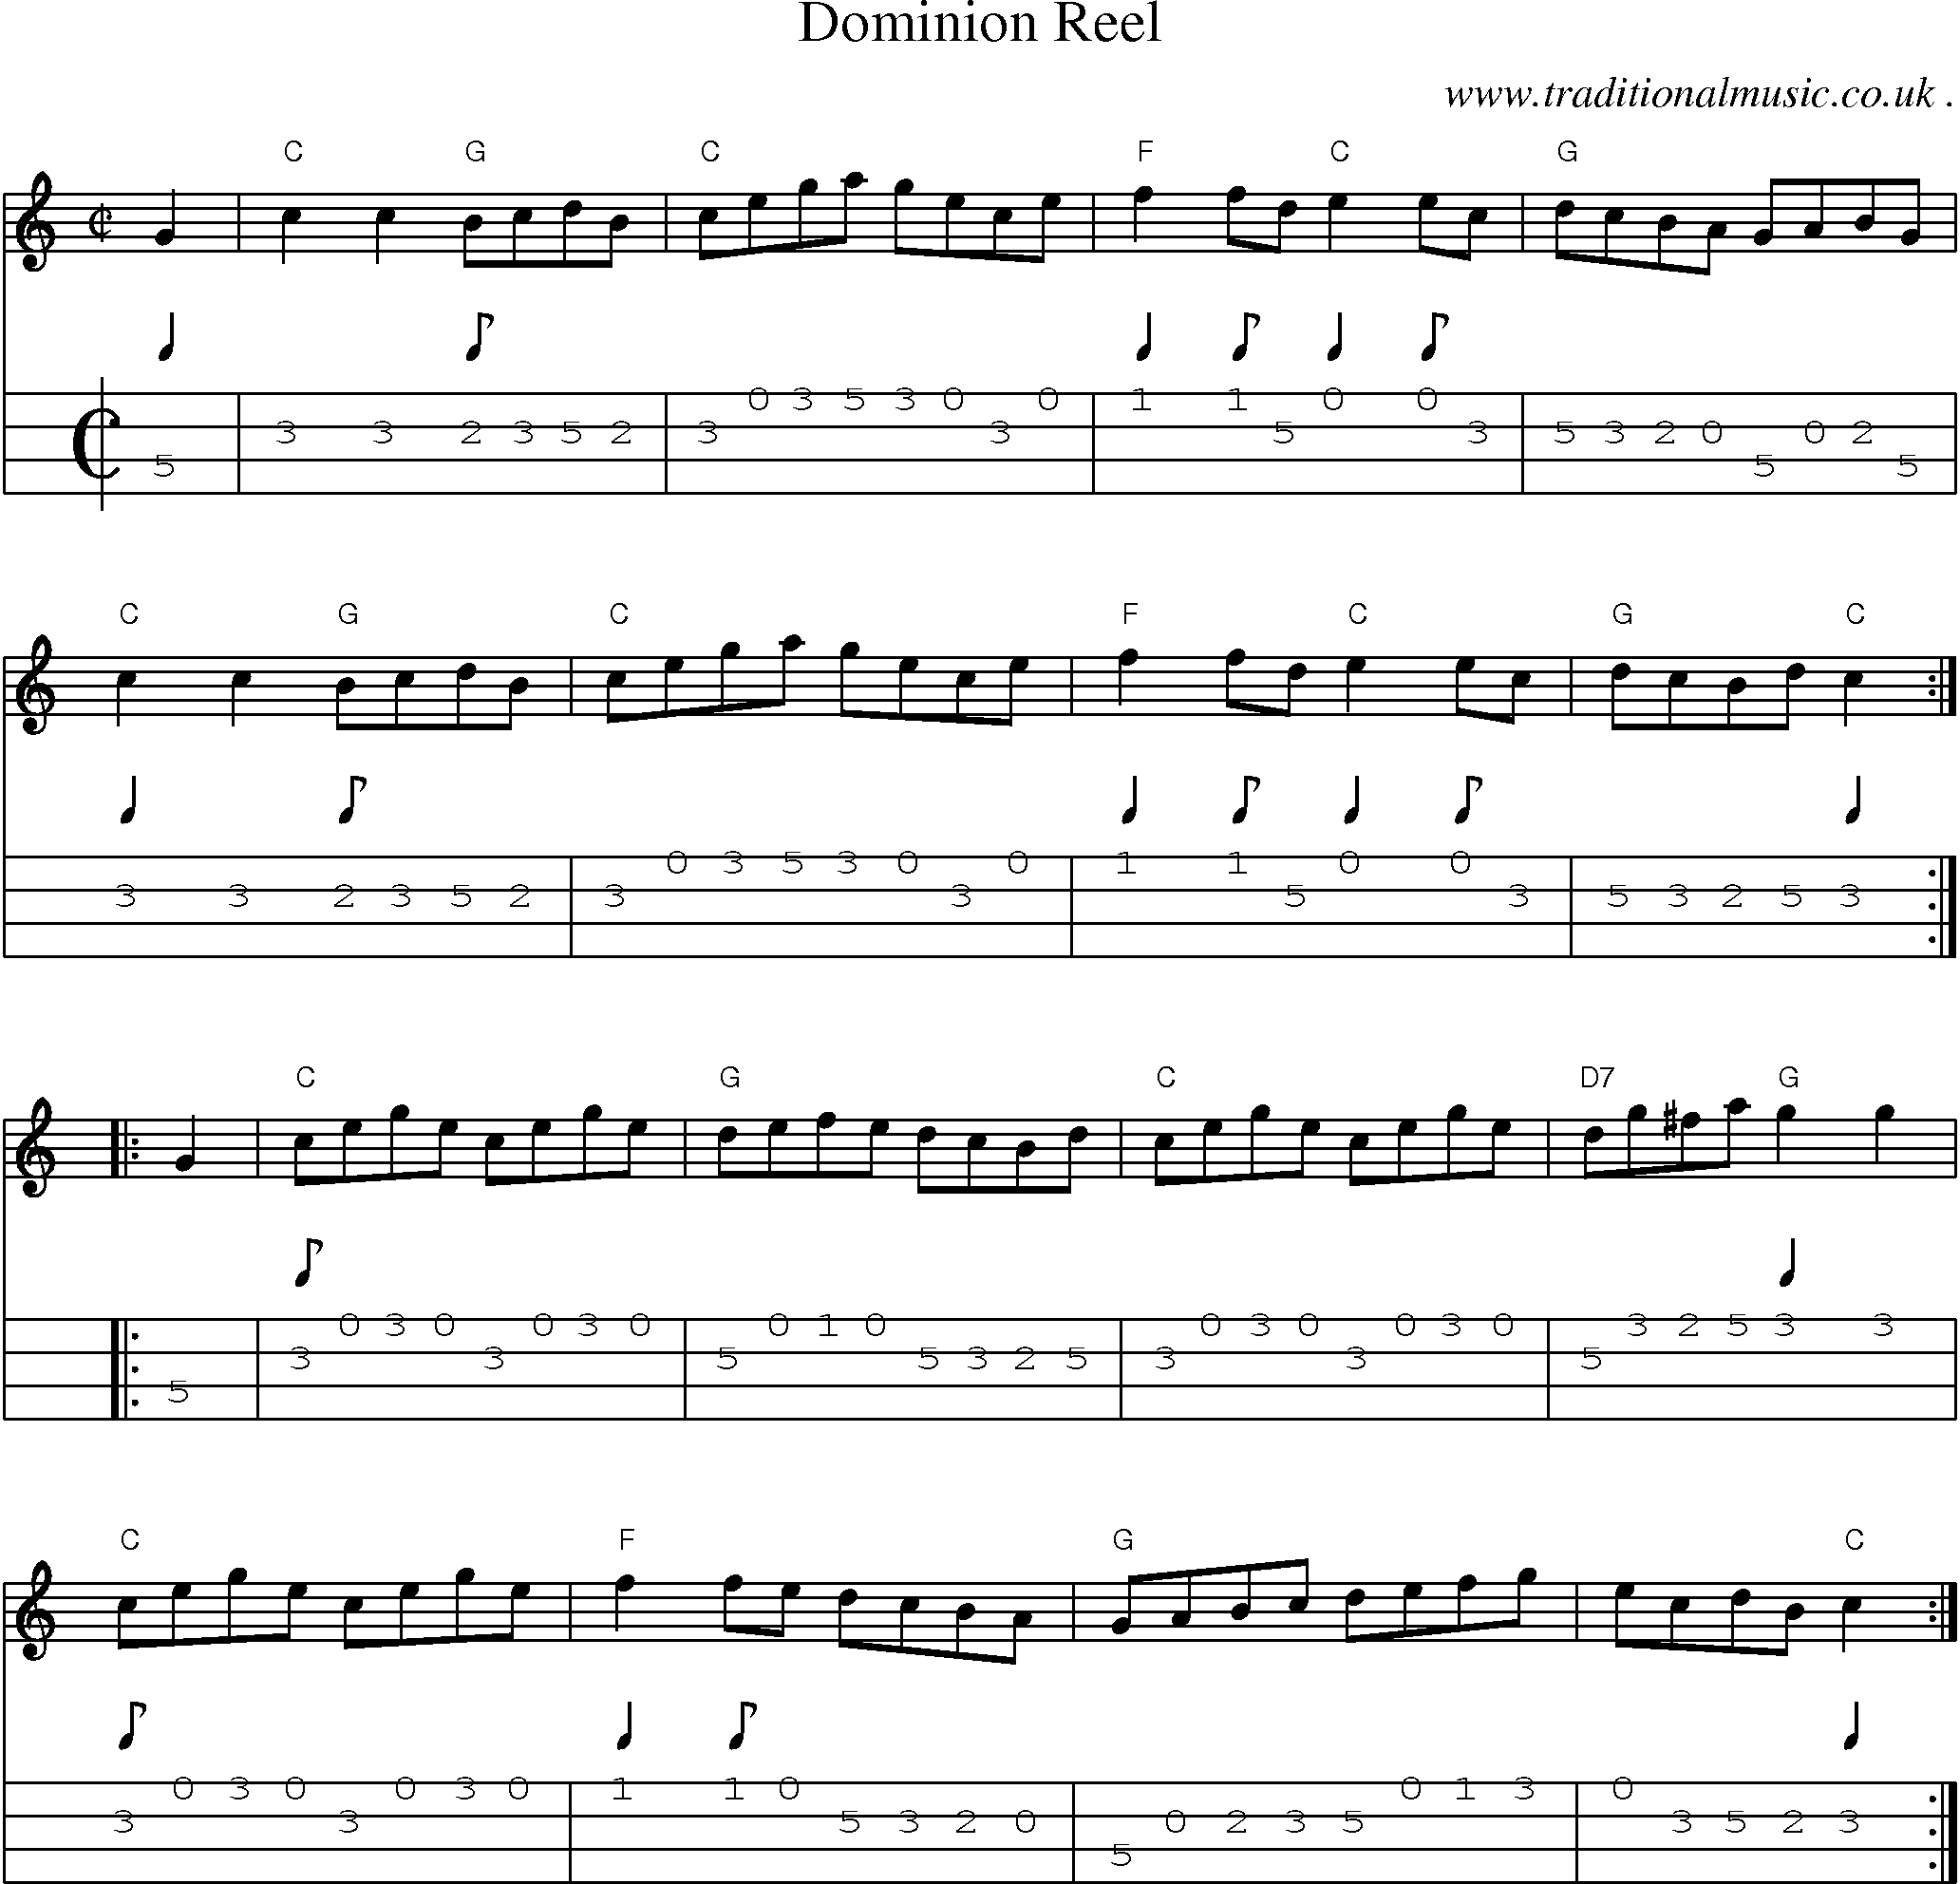 Music Score and Guitar Tabs for Dominion Reel